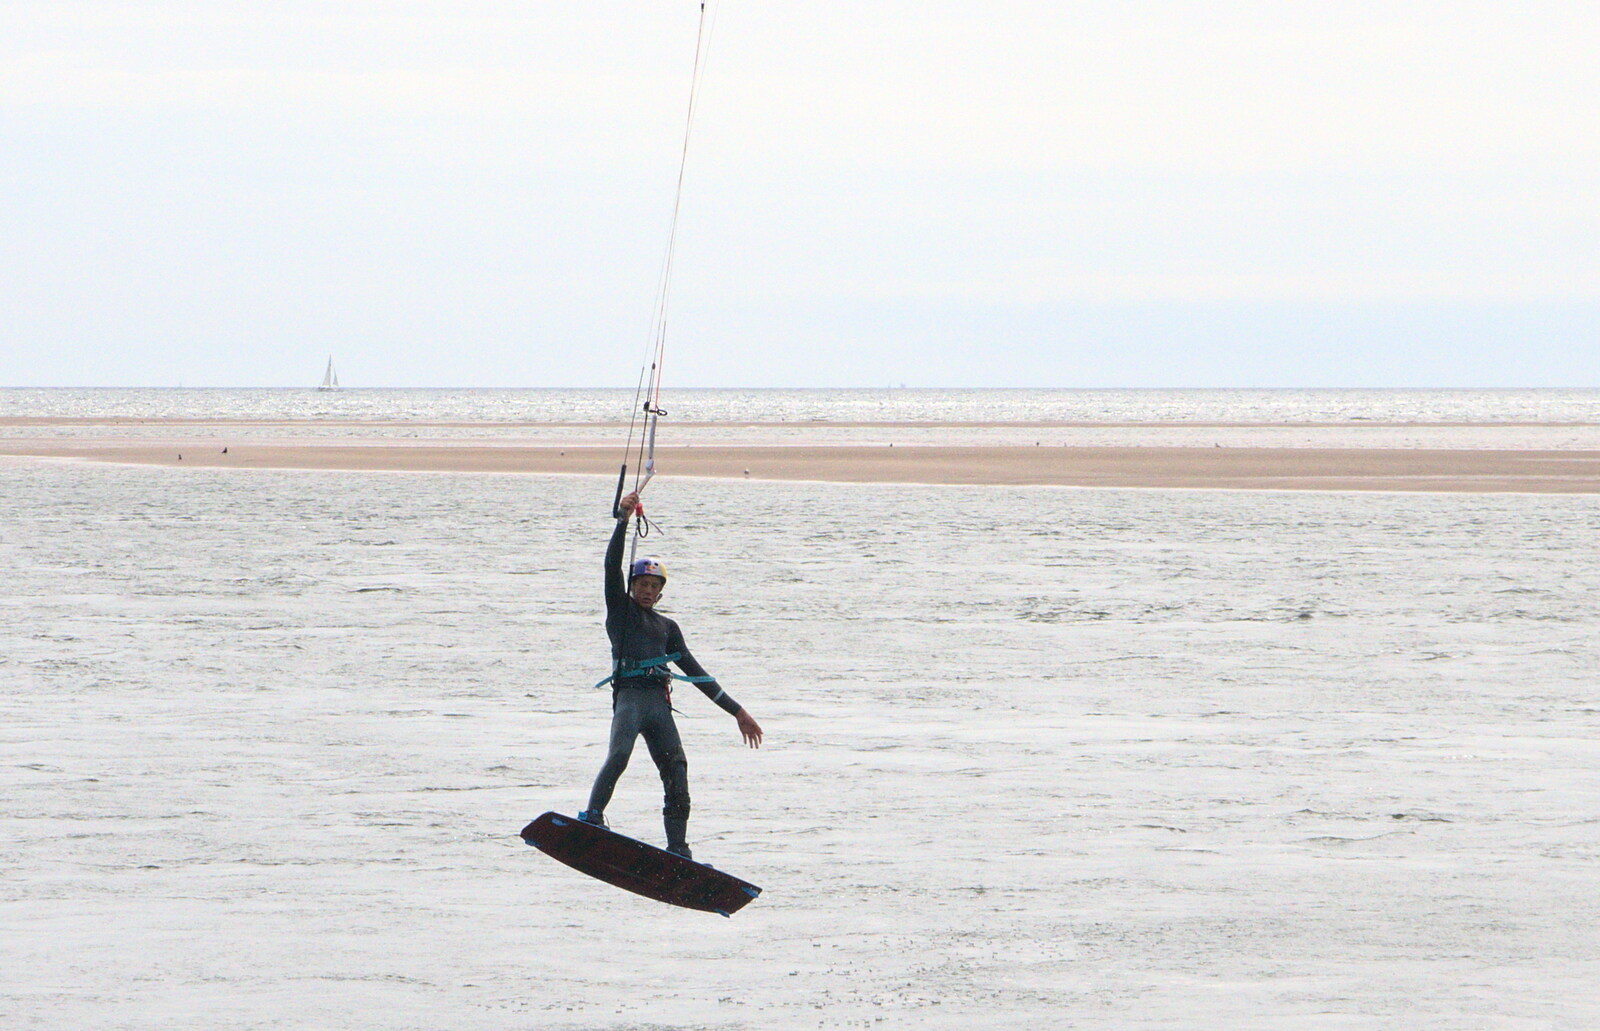 An airborne kite surfer from Grandma J's and a Day on the Beach, Spreyton and Exmouth, Devon - 13th April 2017